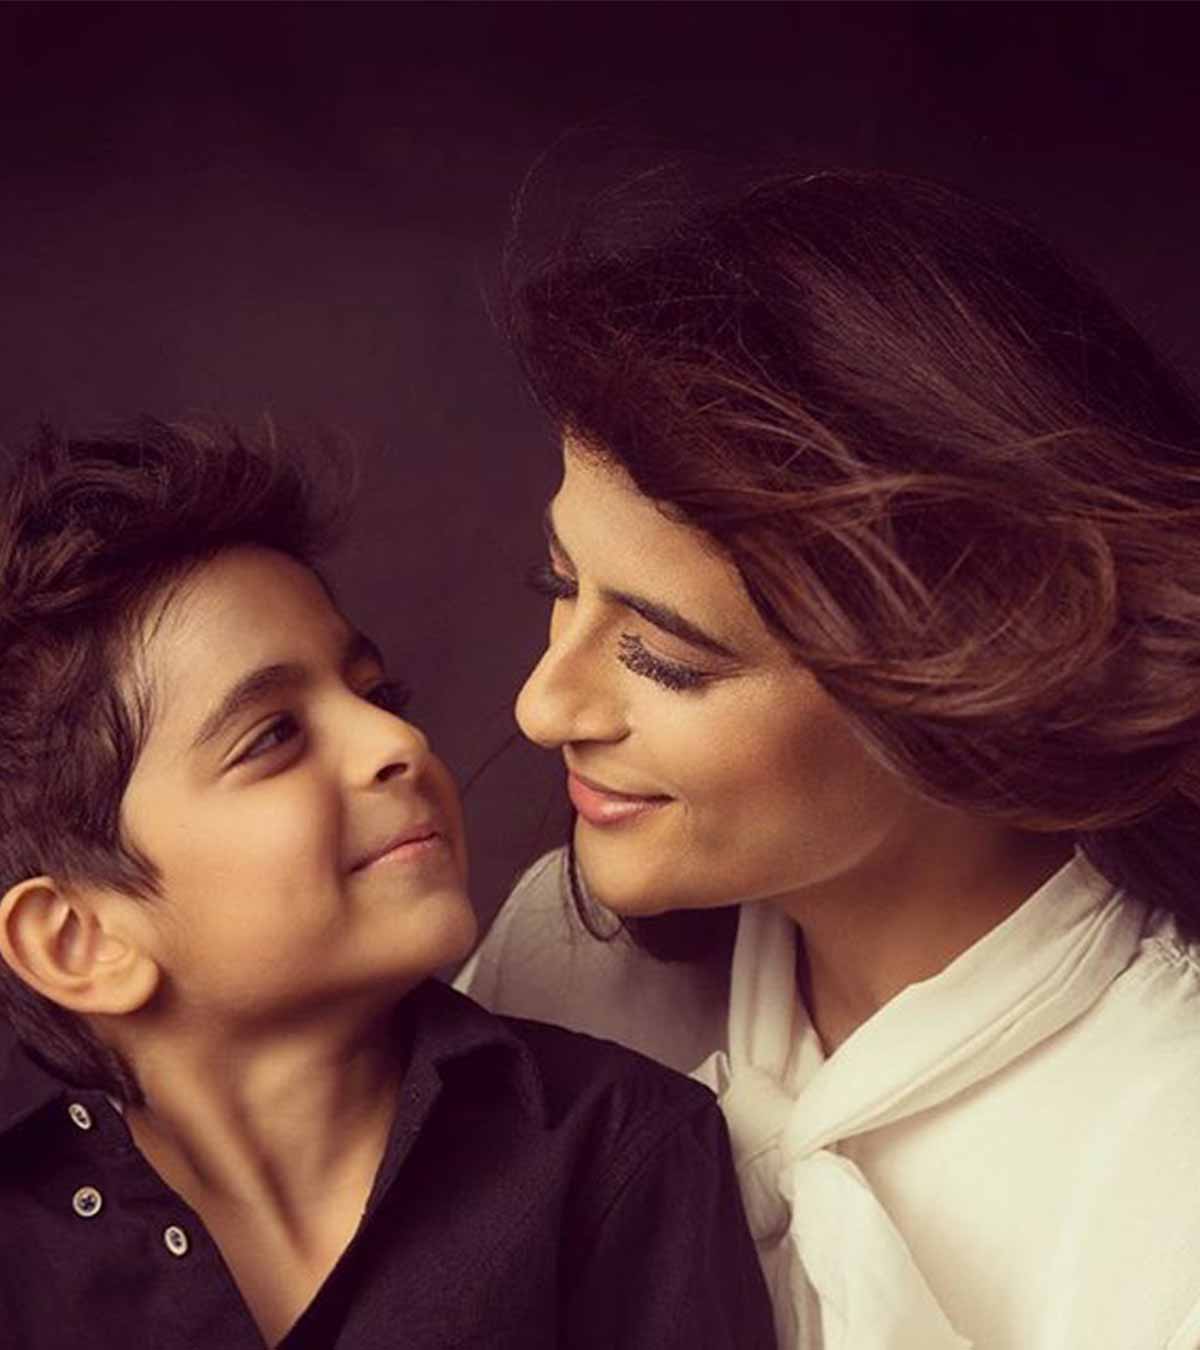 Tahira And Ayushmaan's Son, Virajveer Answers 'What Being Gay Means' To Him – Leaves Tahira And Everyone Teary-Eyed!